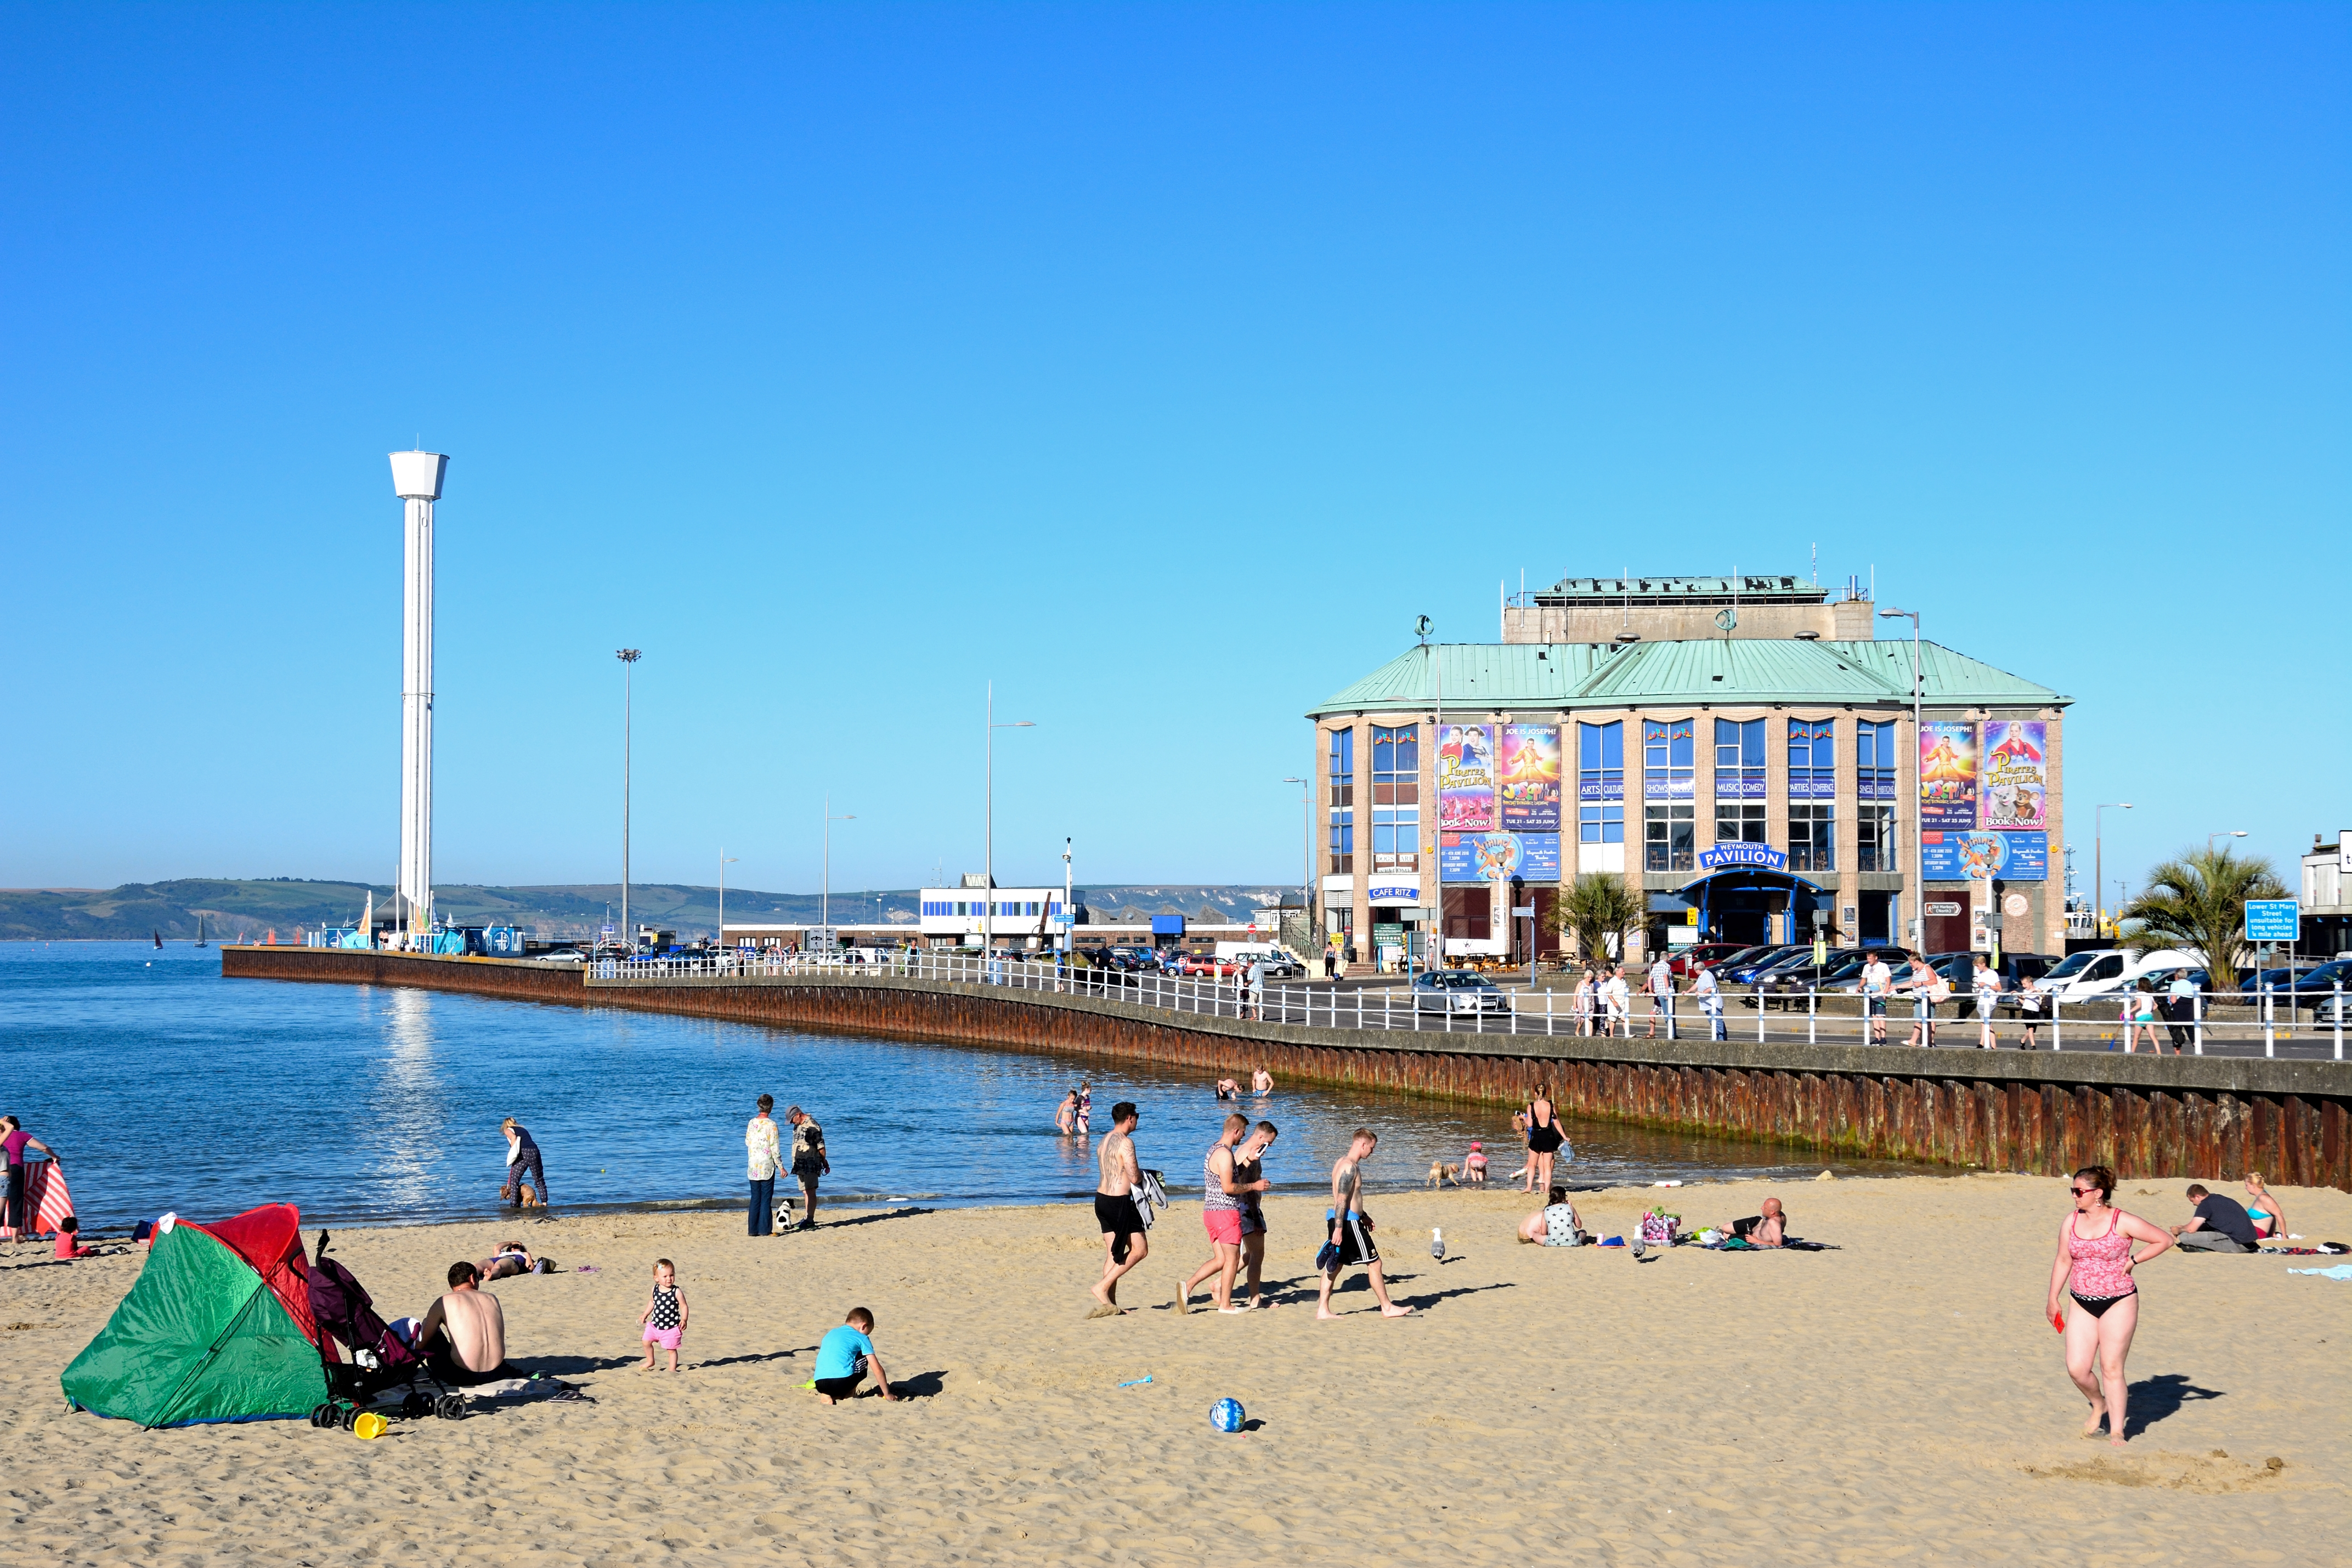 Weymouth Beach is one of the best in Europe, according to TripAdvisor